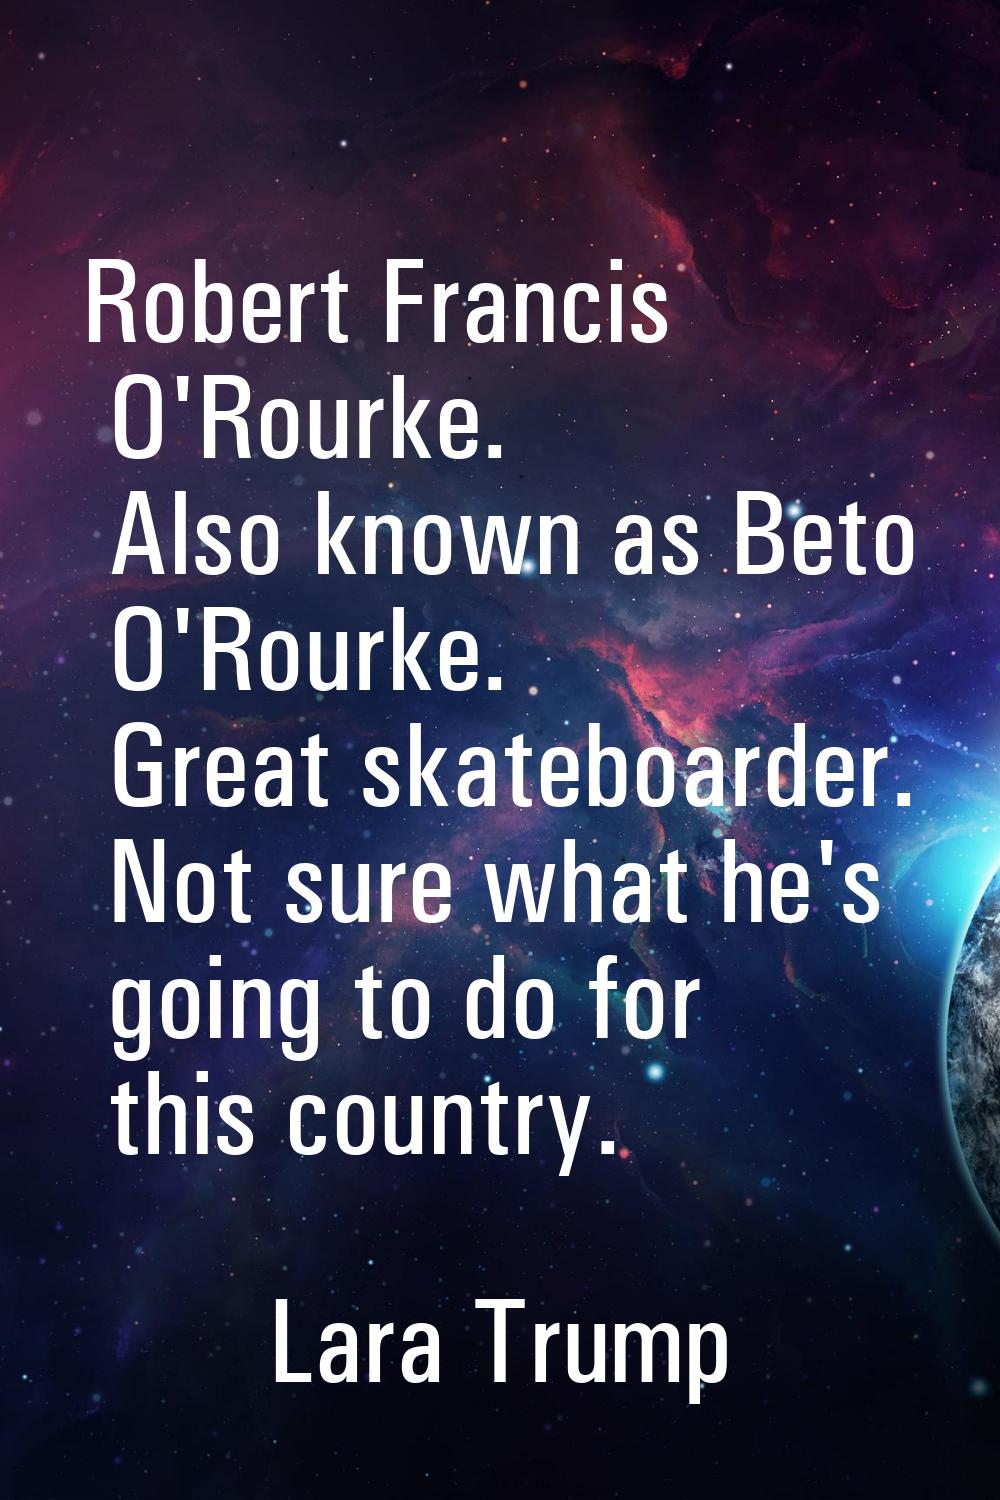 Robert Francis O'Rourke. Also known as Beto O'Rourke. Great skateboarder. Not sure what he's going 